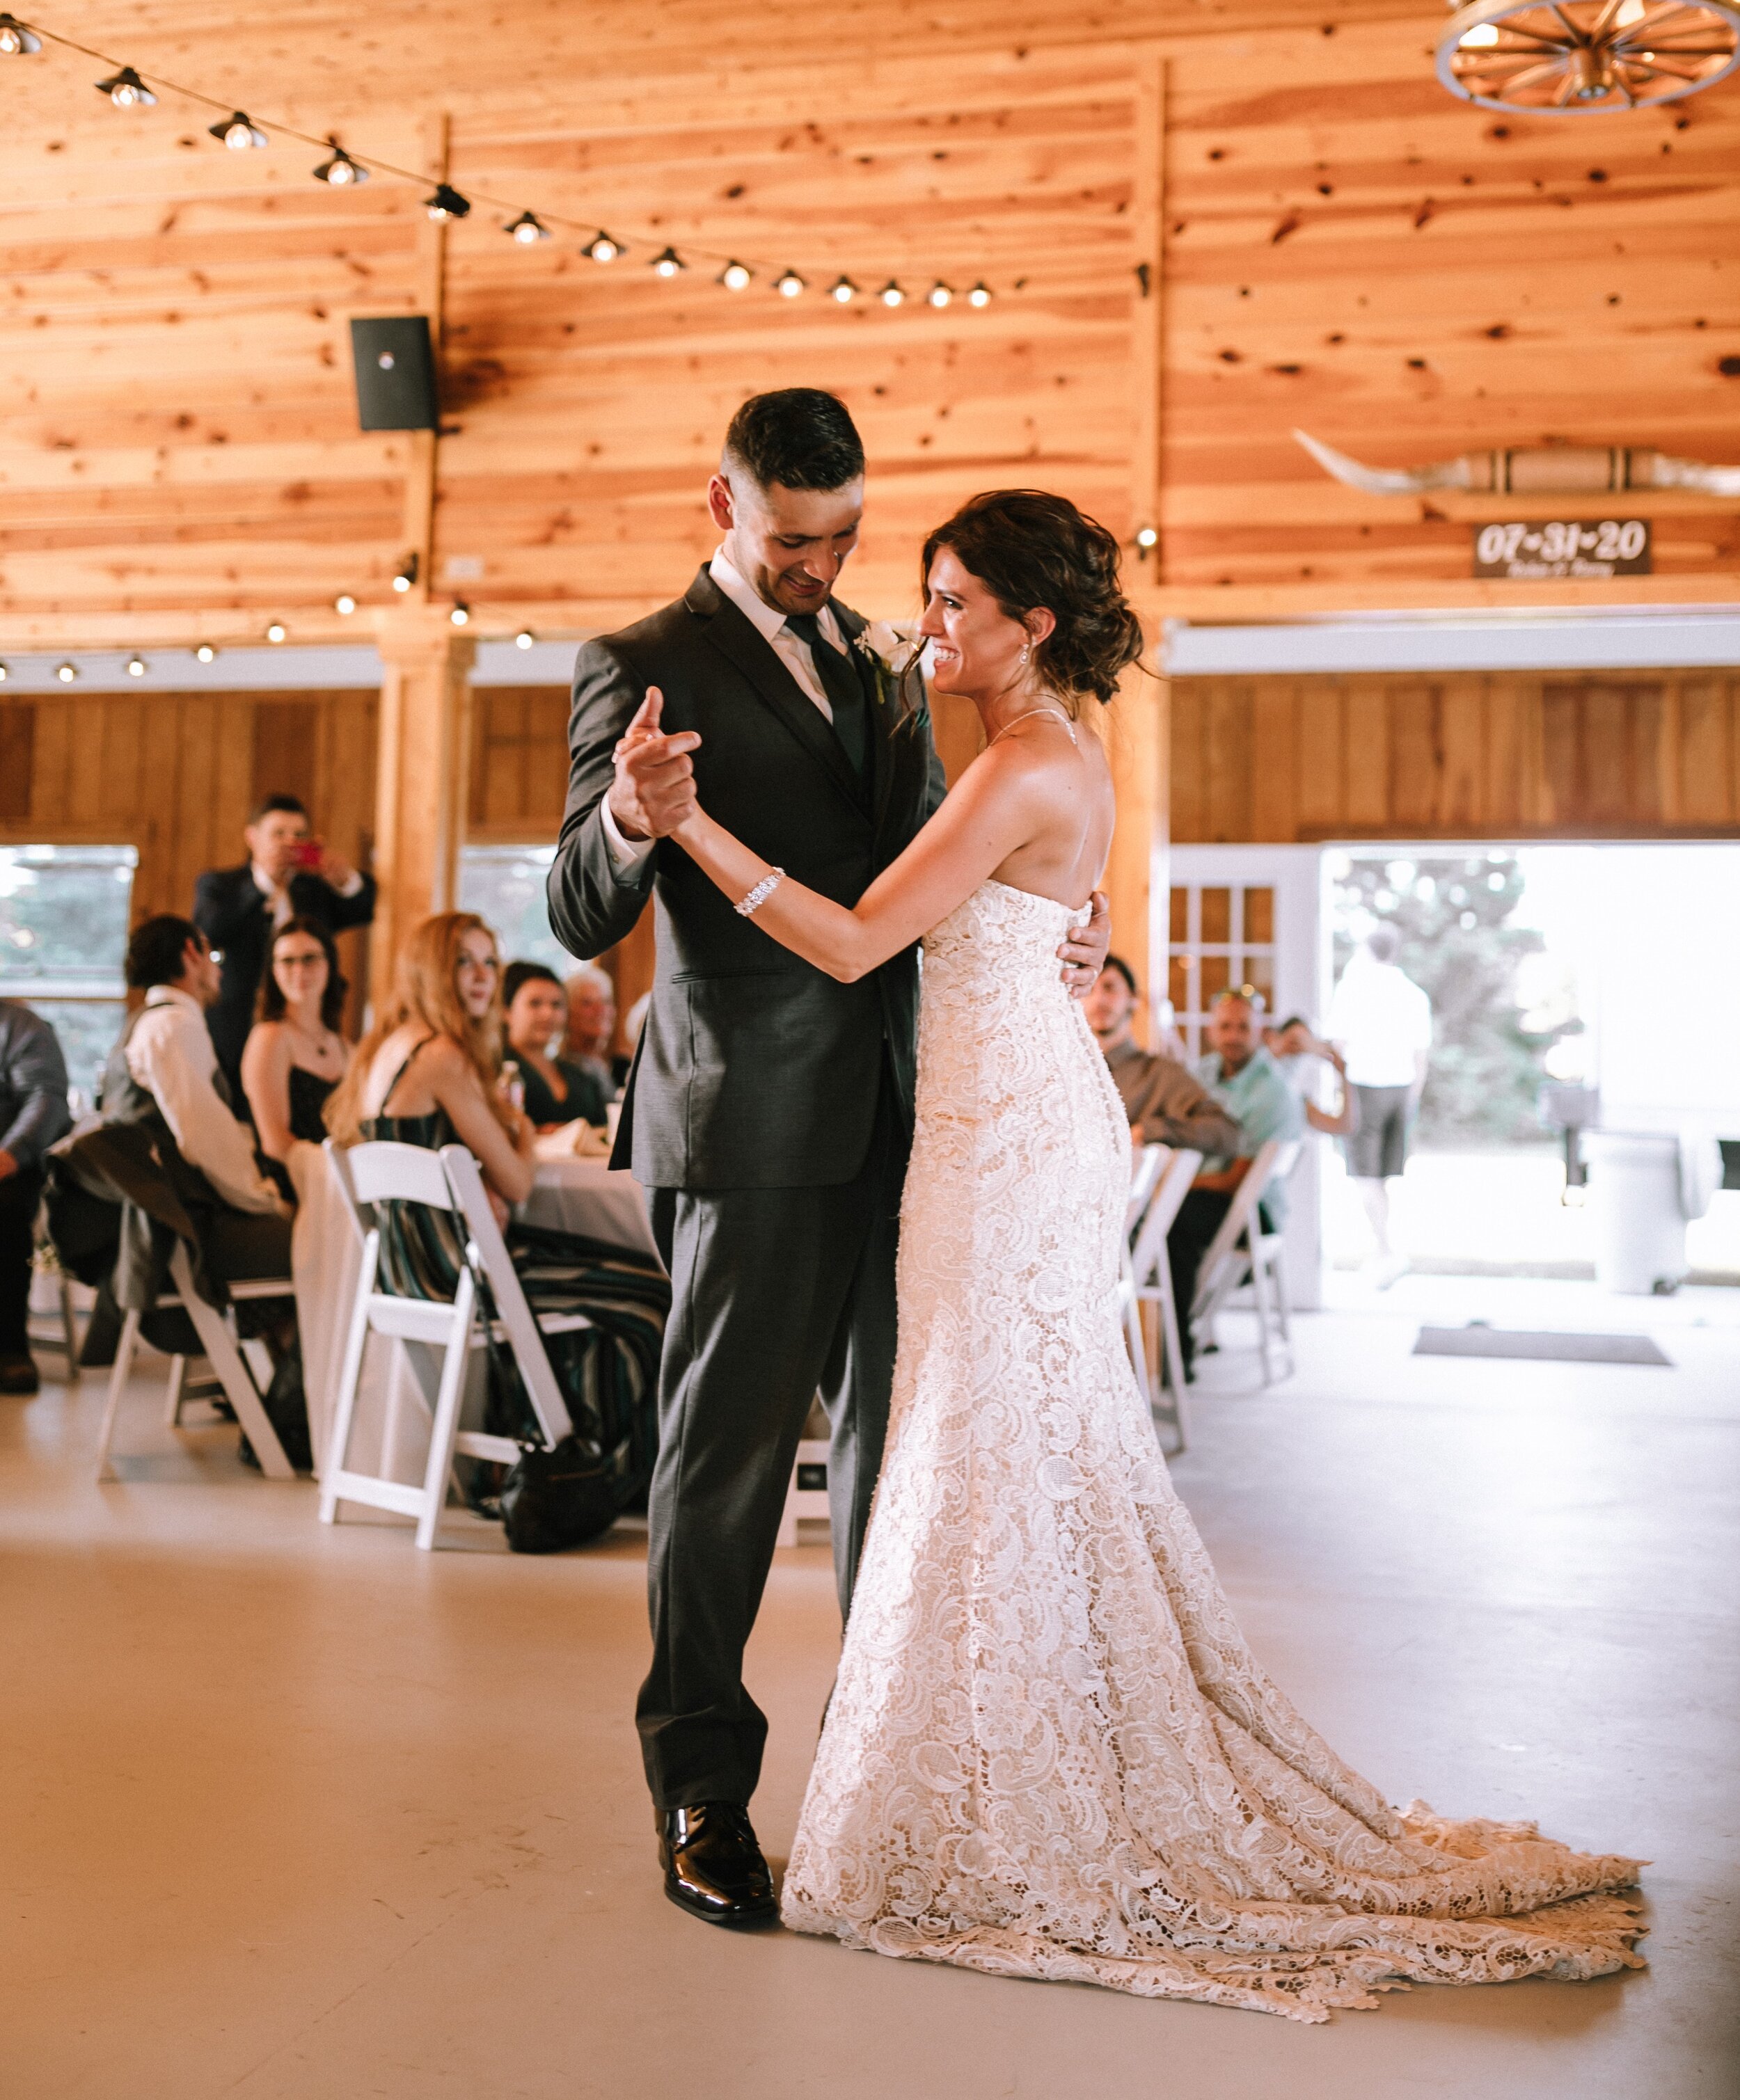 bride and groom first dance in michigan barn